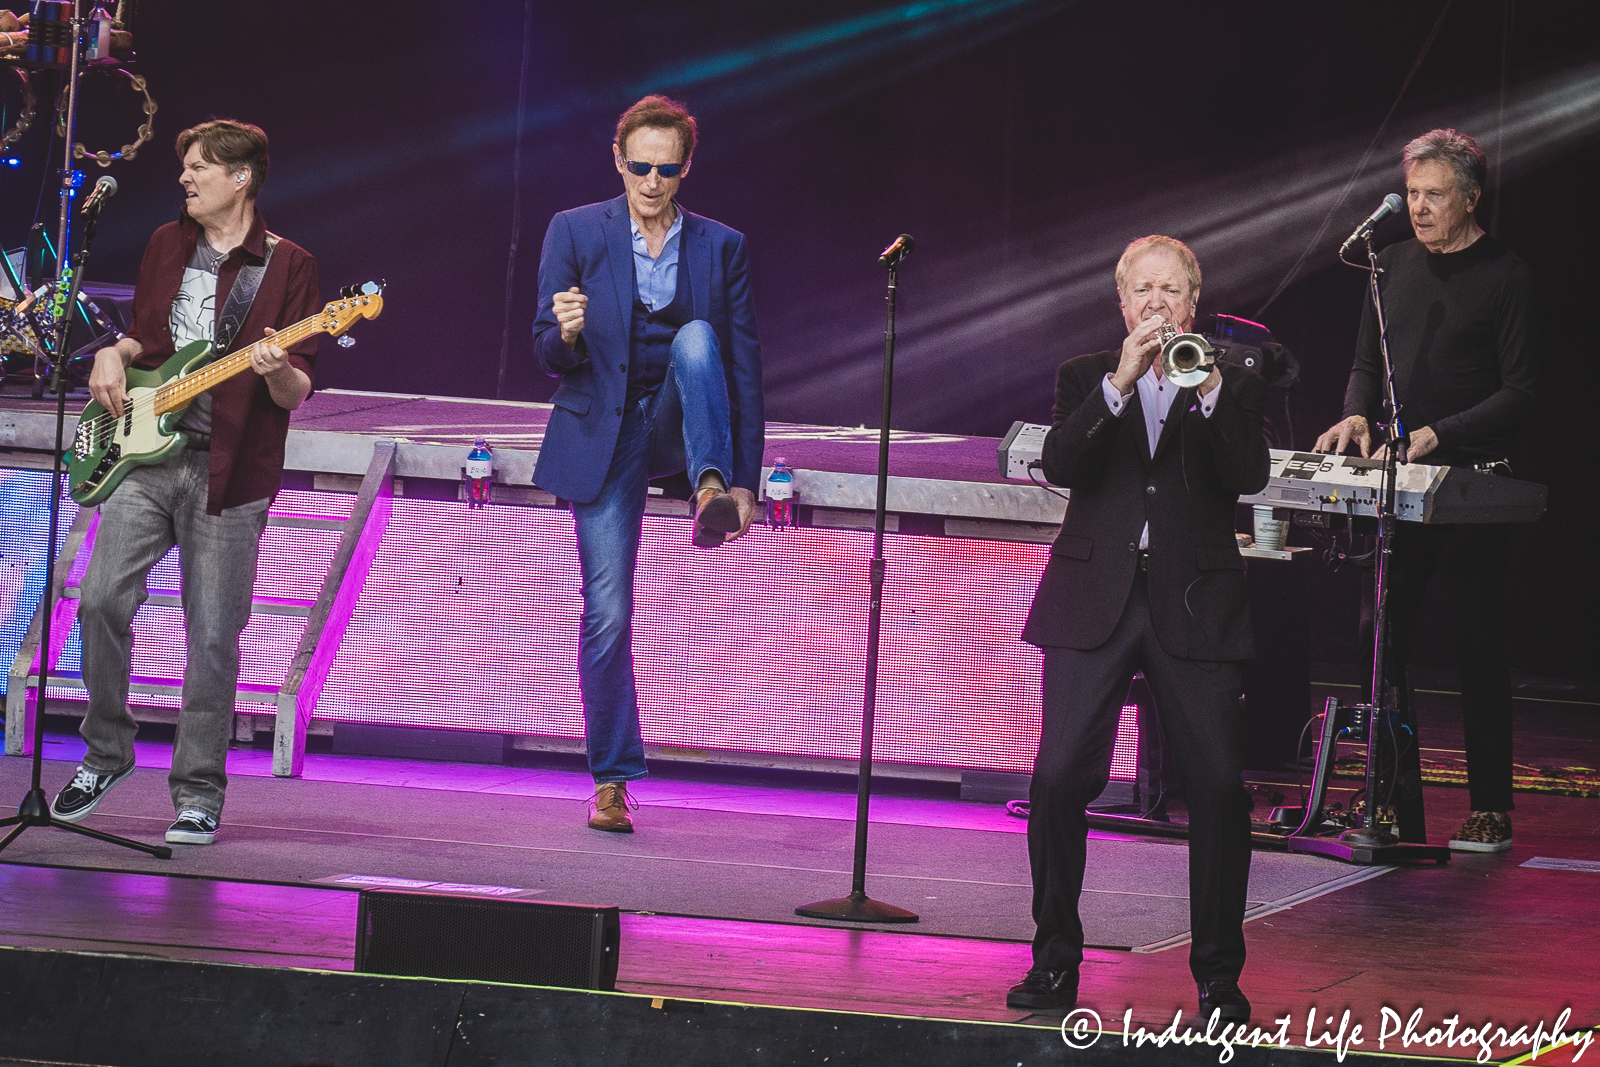 Chicago trumpet player Lee Loughnane performing live in concert at Starlight Theatre in Kansas City, MO on May 26, 203.